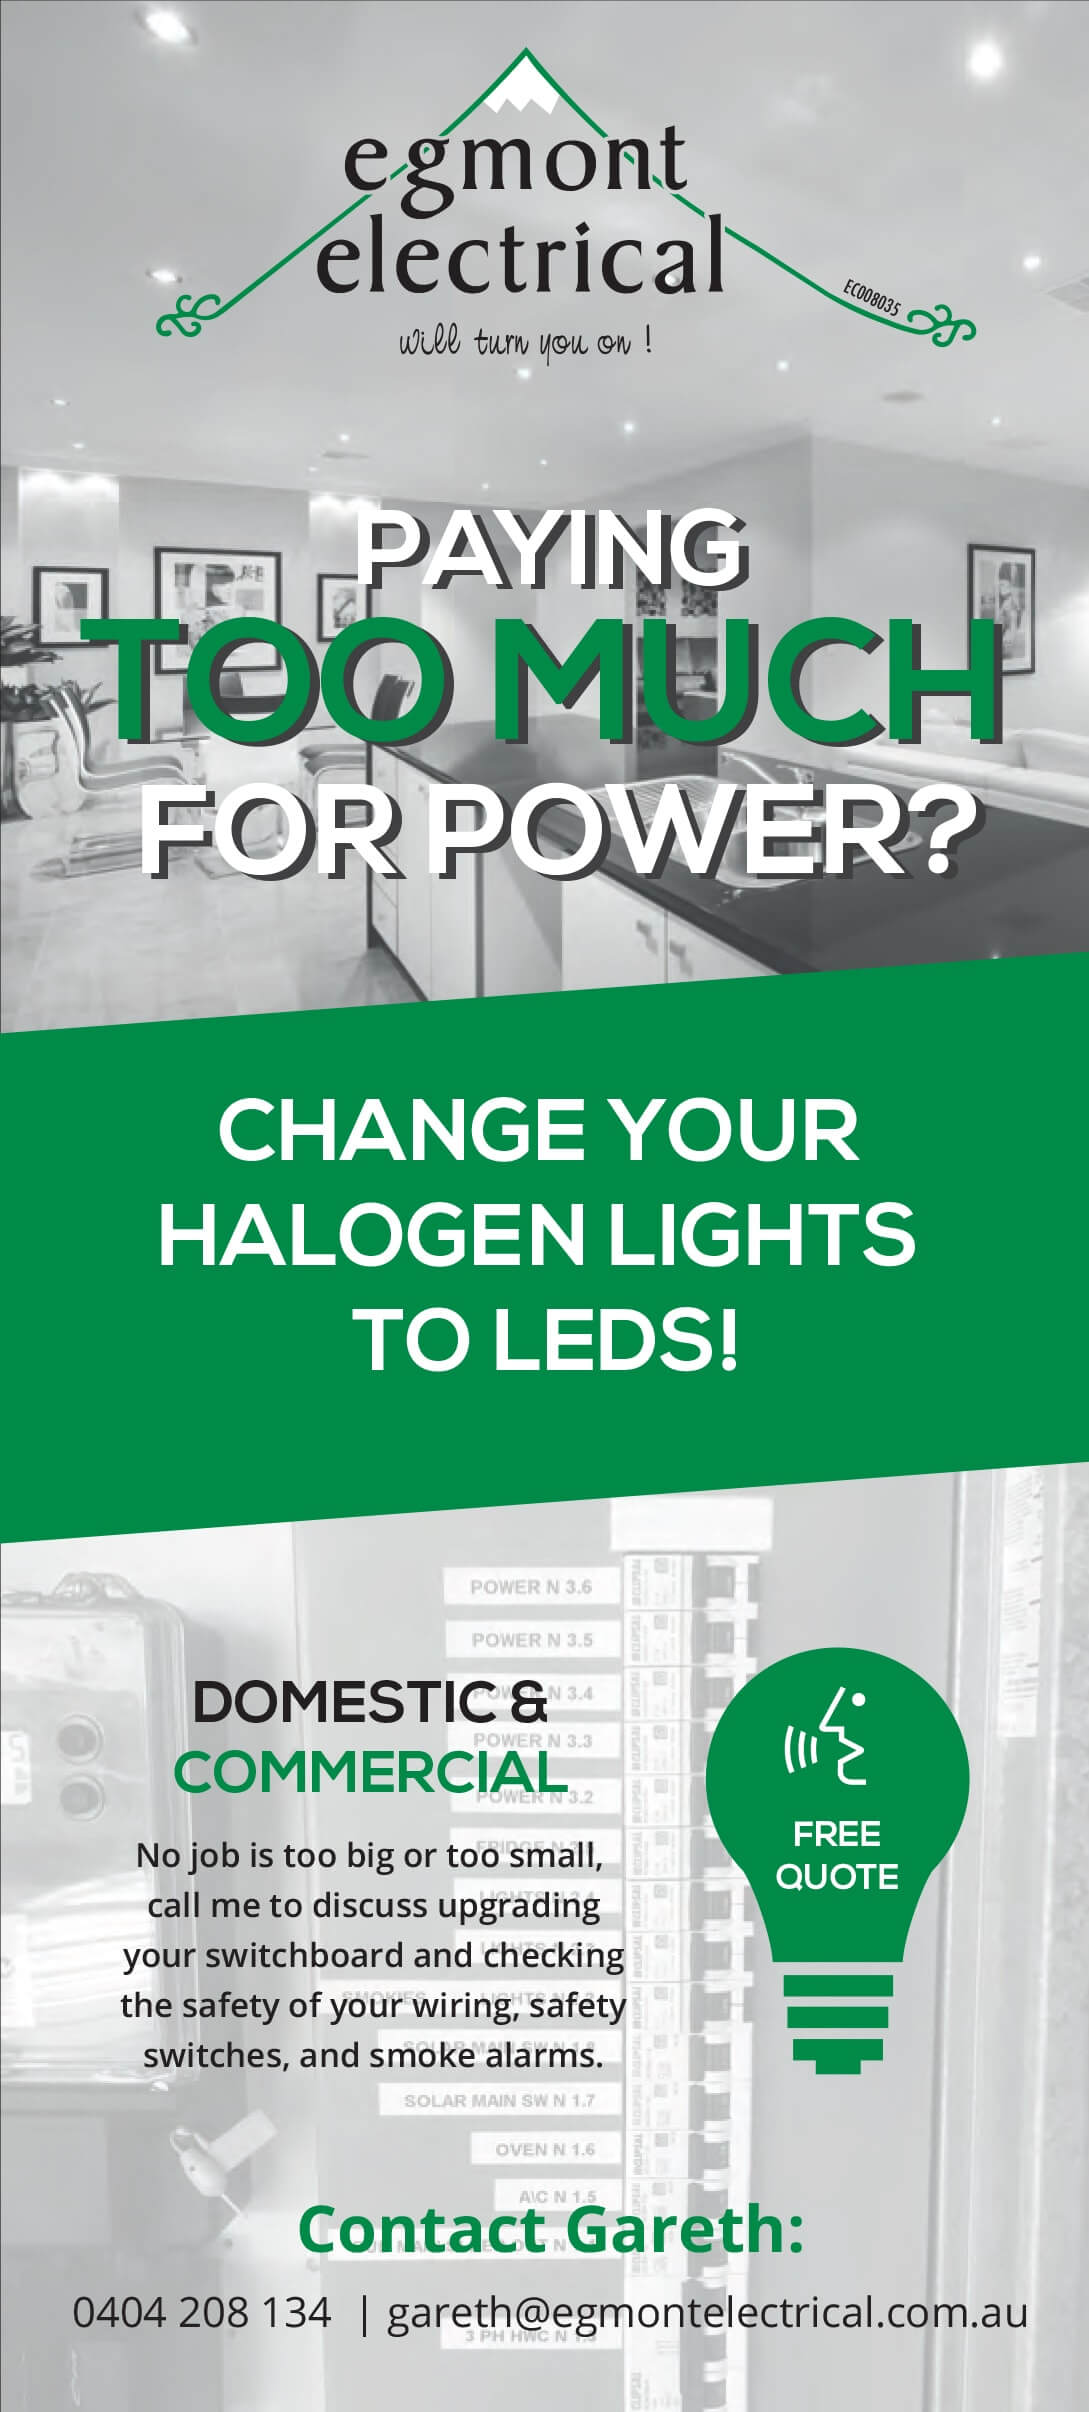 change your lights to leds poster